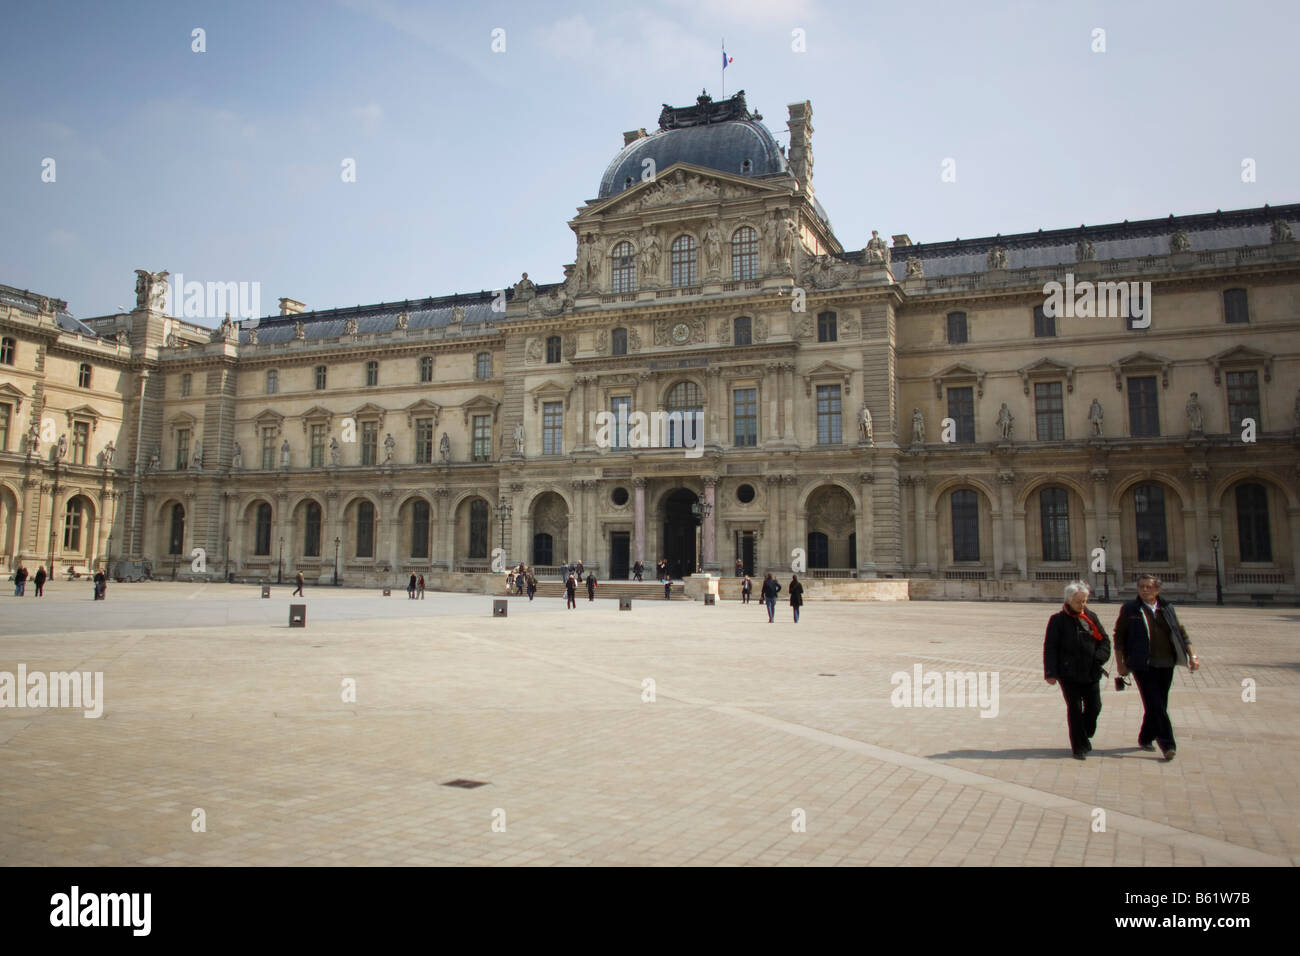 A view from a courtyard of the Musee du Louvre in Paris Stock Photo